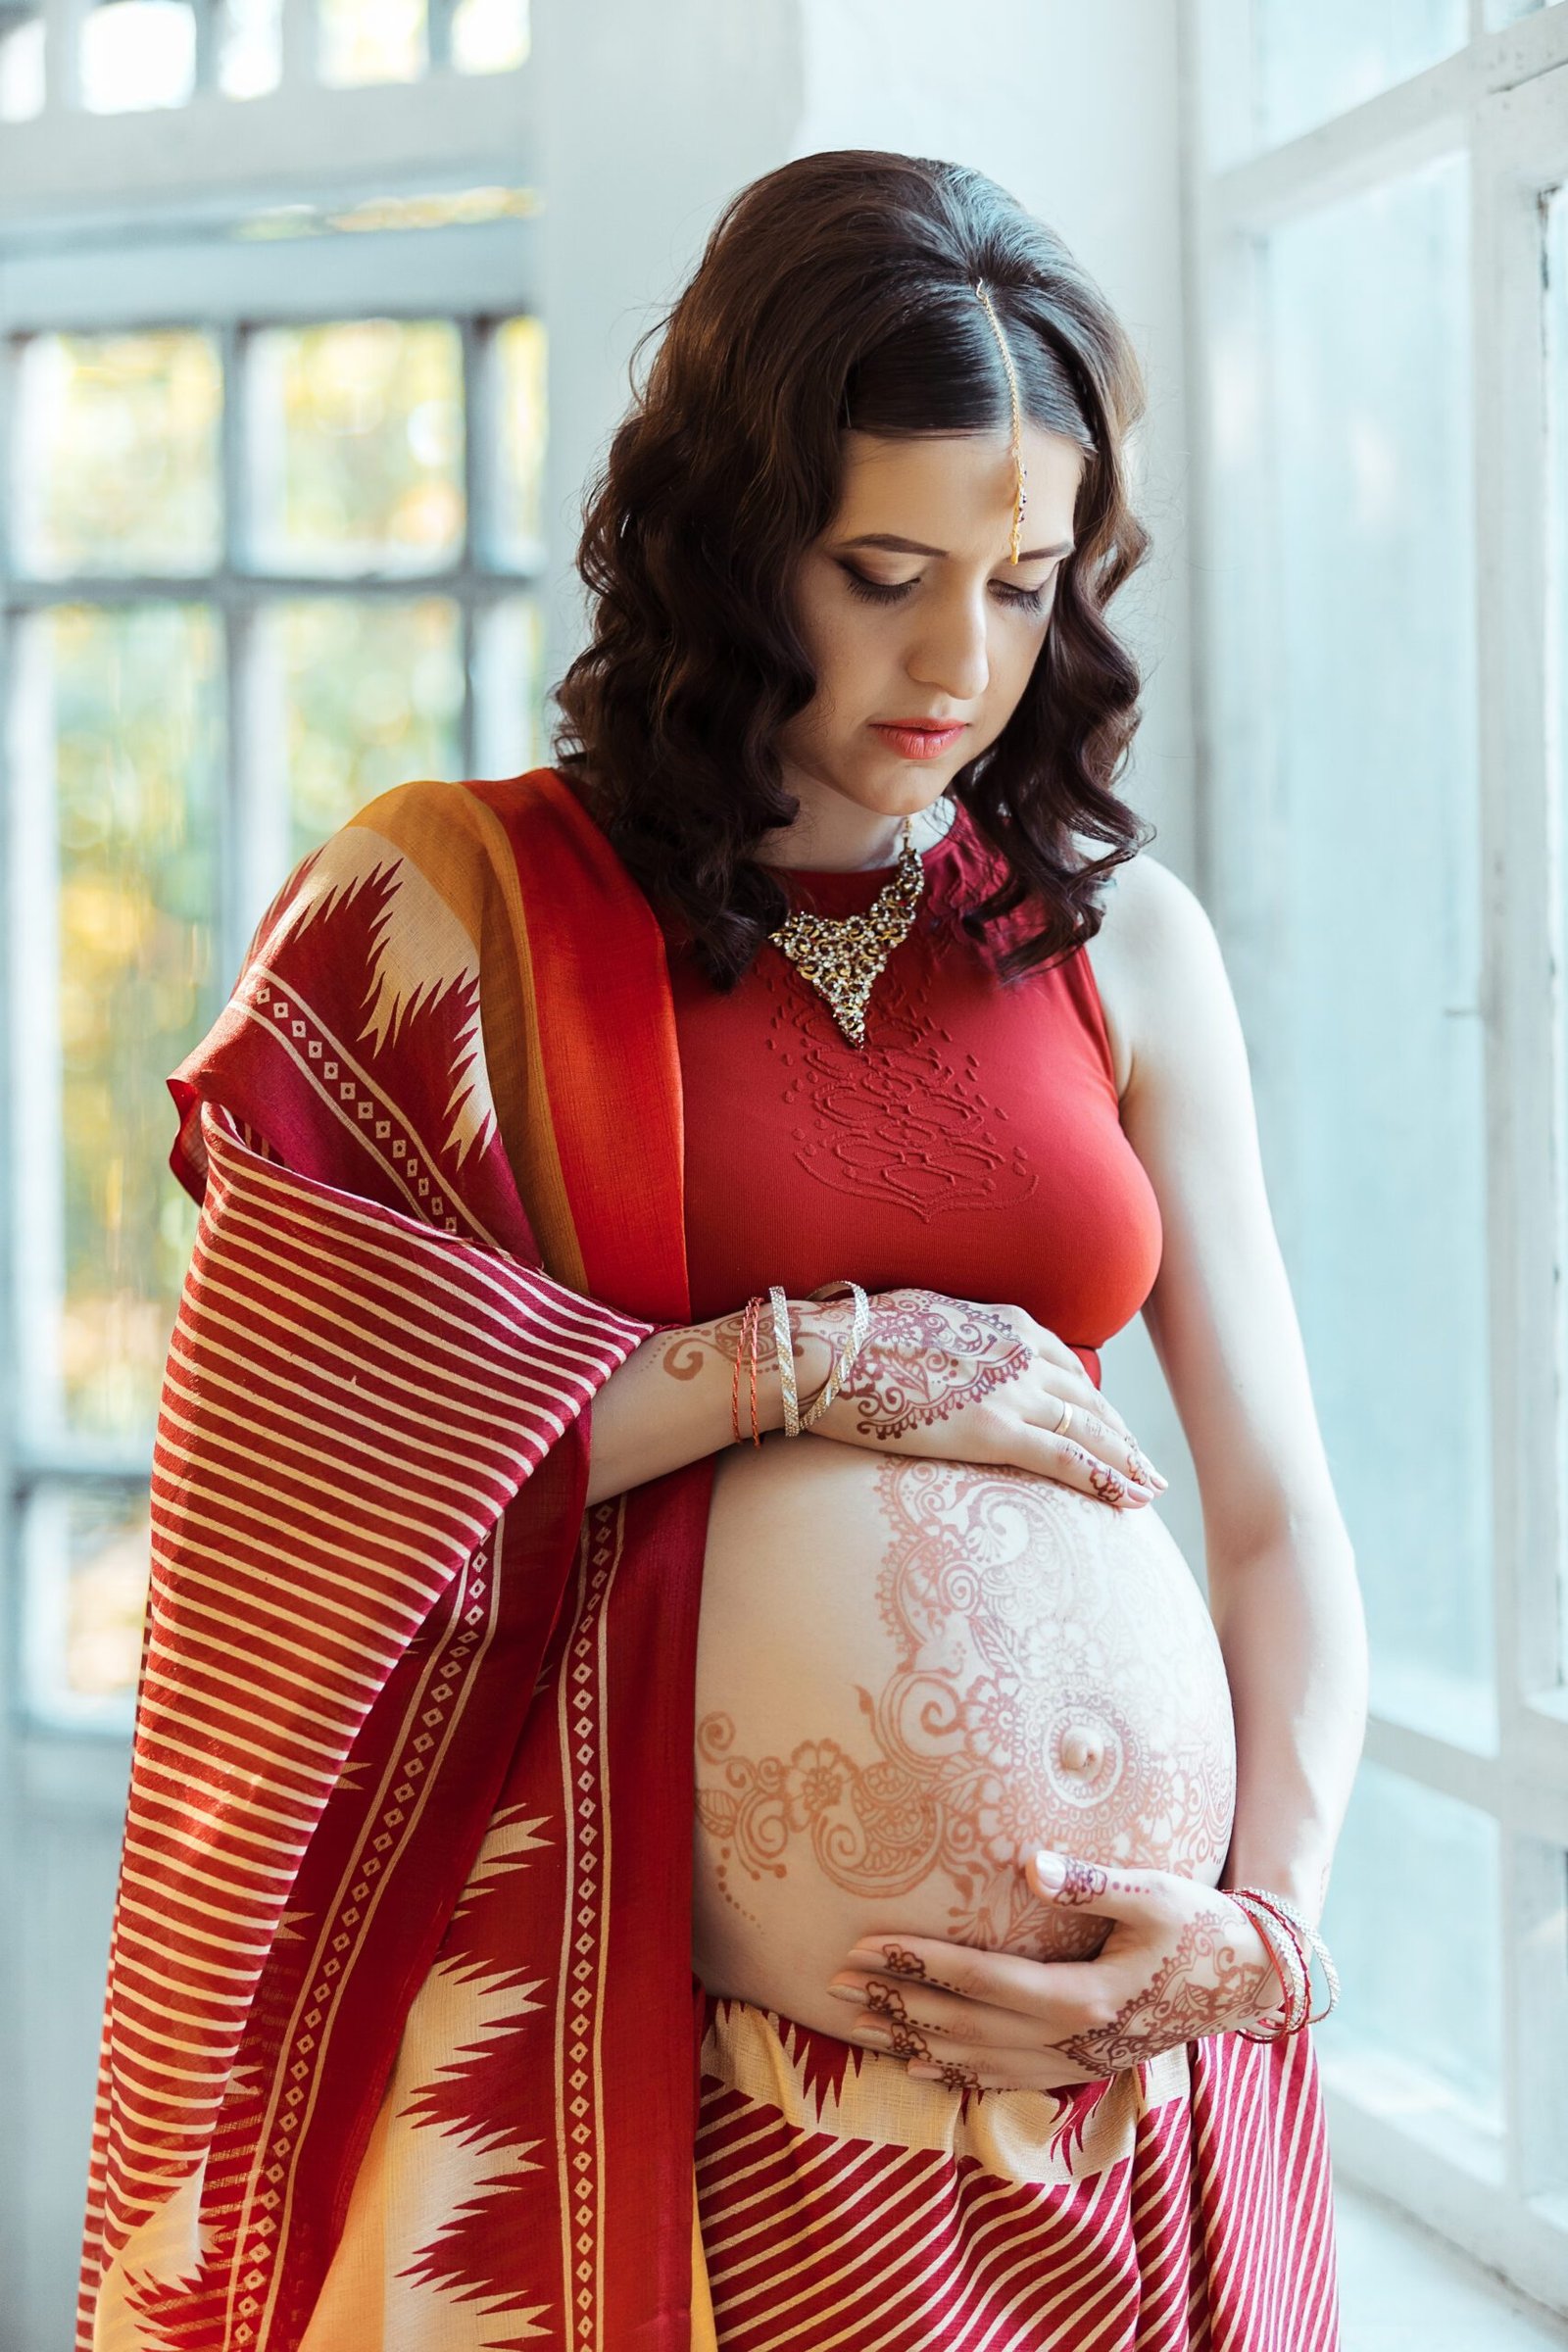 Discover More Than 130 Pregnant Women Wearing Saree Super Hot Vn